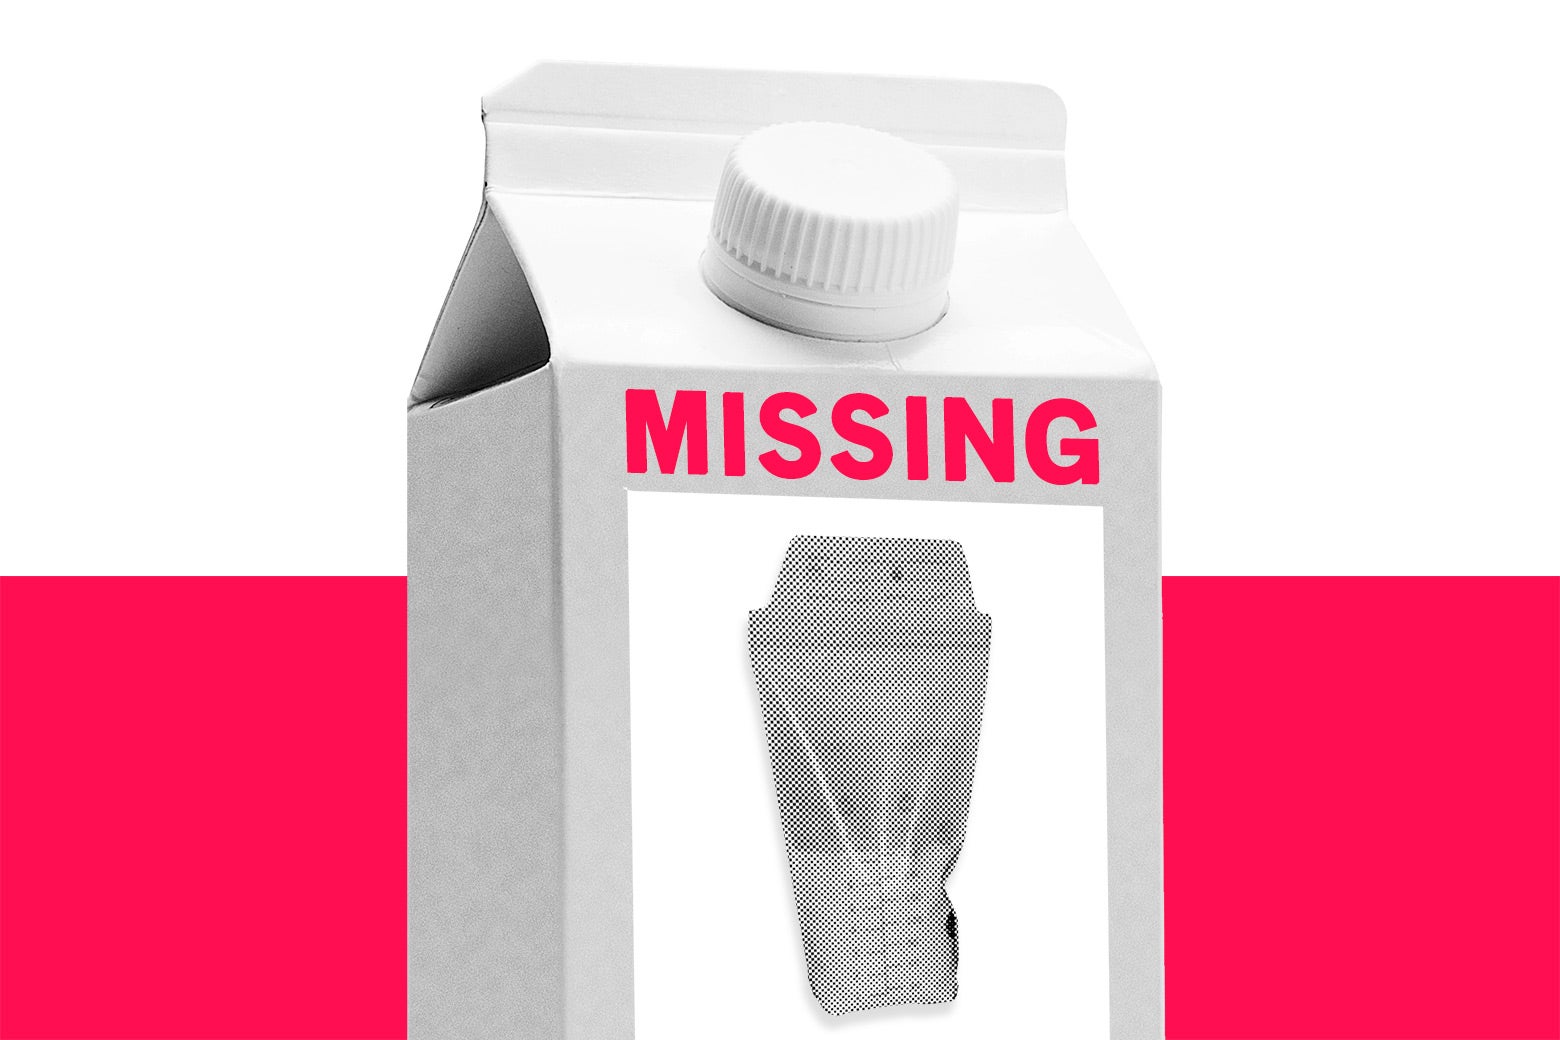 A milk carton with a "missing" label on it. 